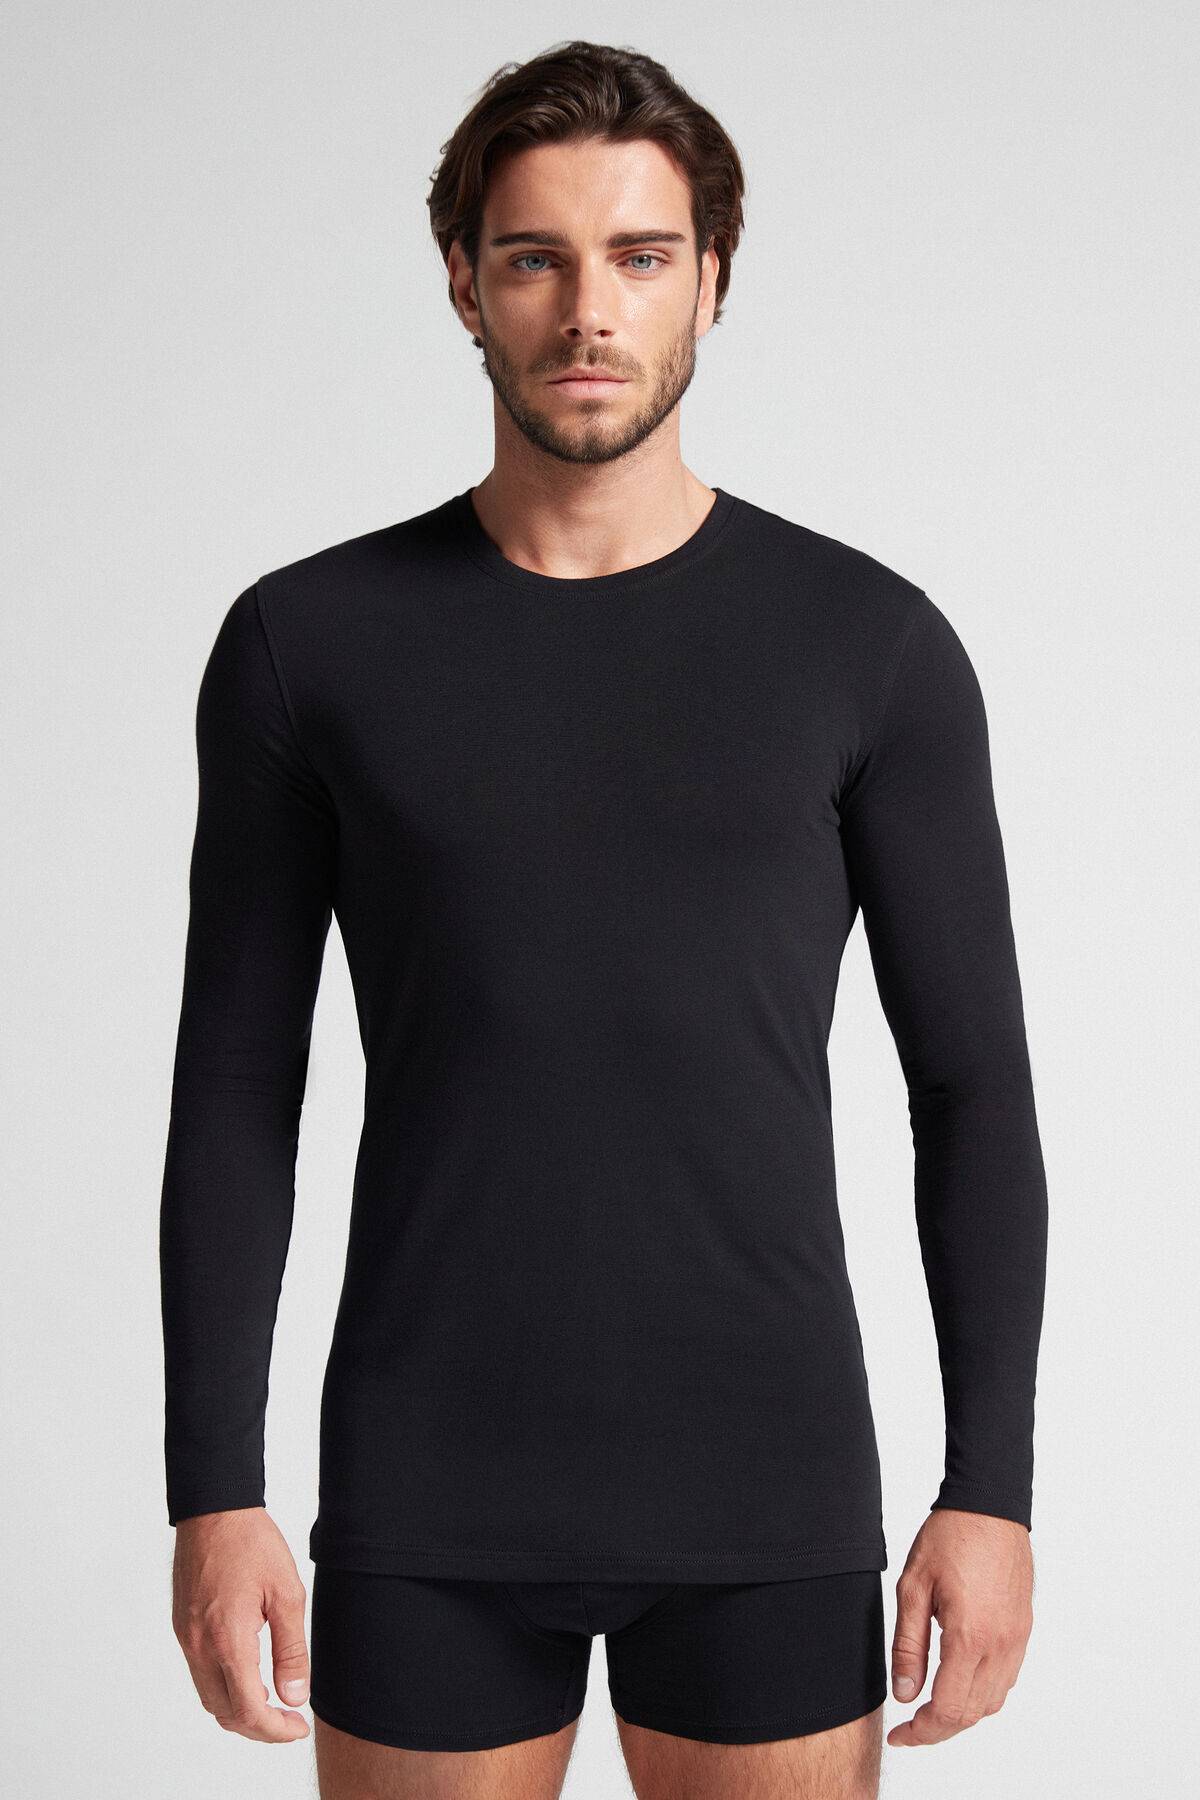 Long-Sleeve Stretch Supima Cotton Top | Intimissimi